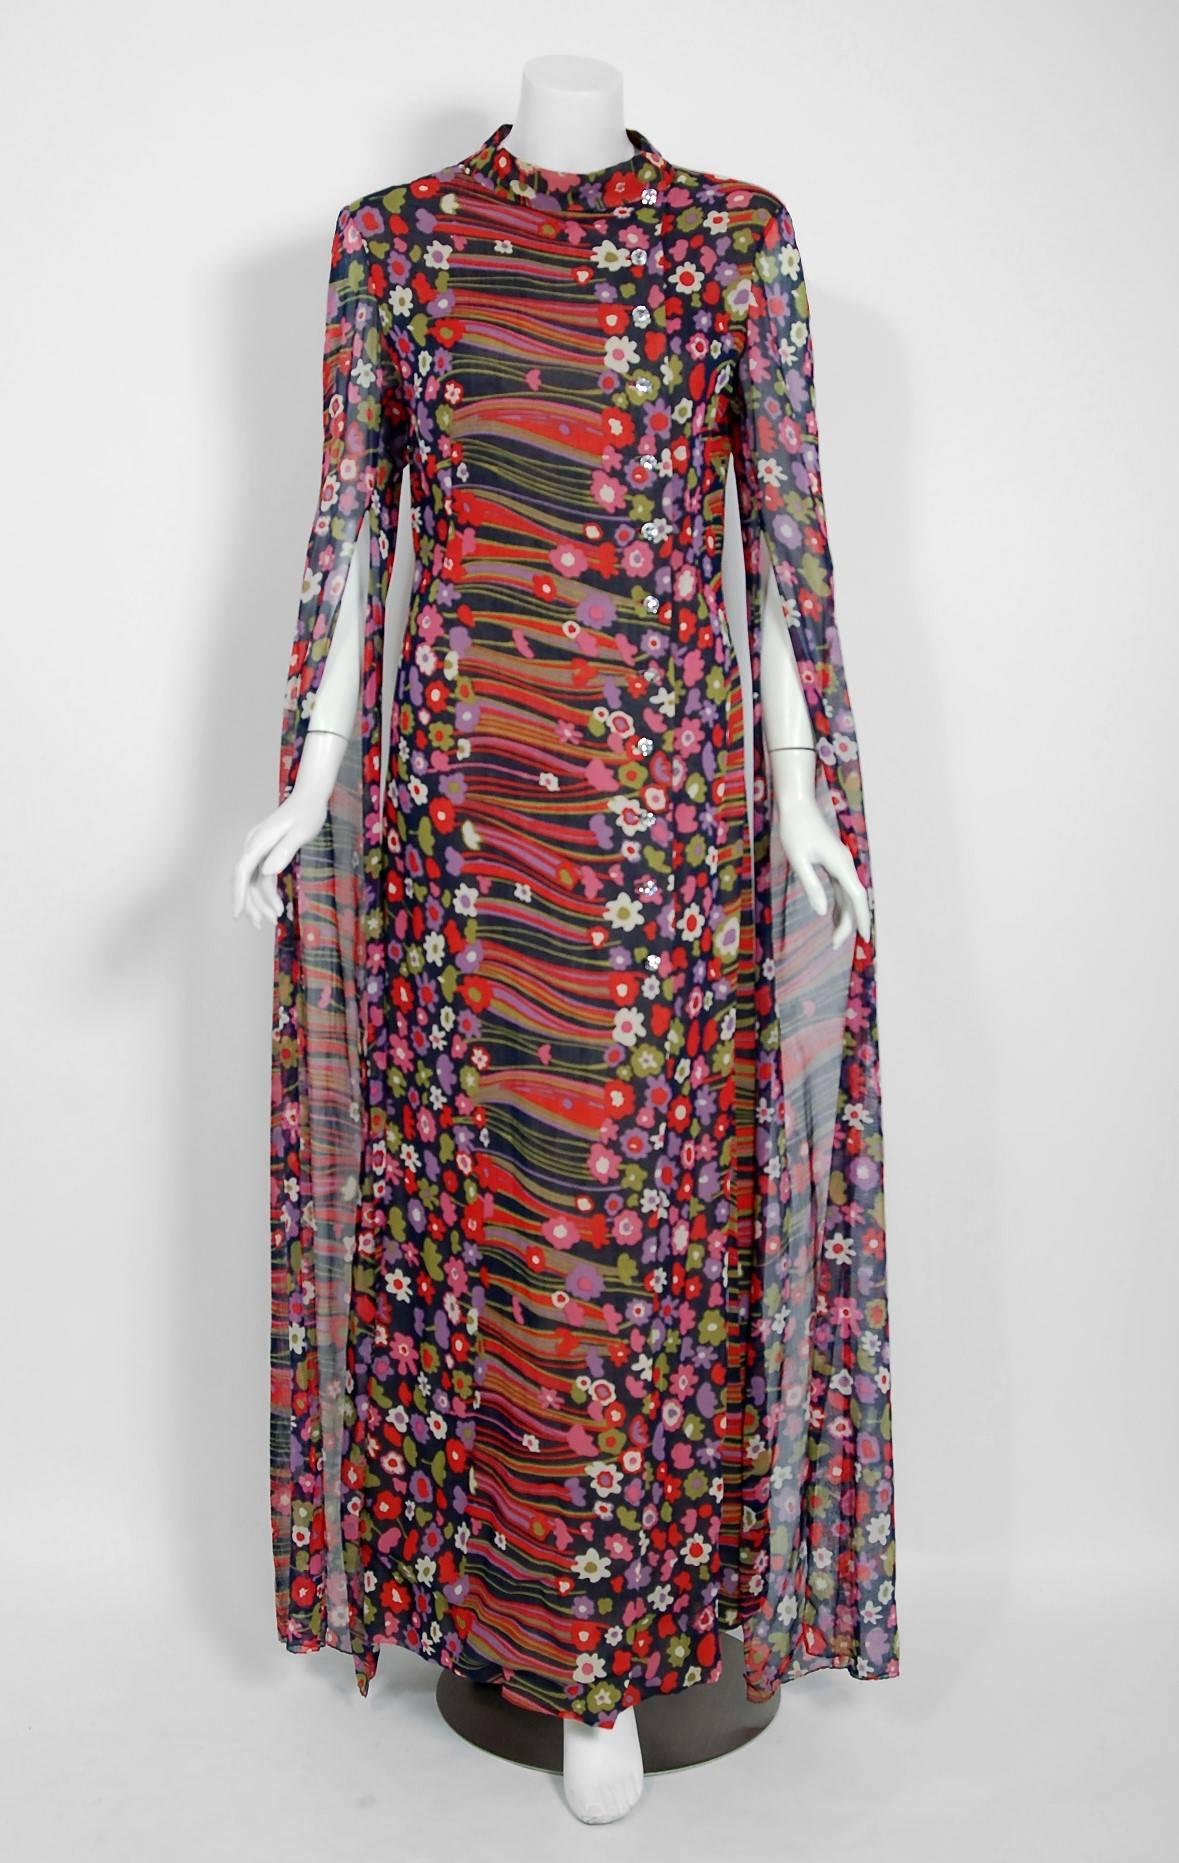 Breathtaking Pauline Trigère designer abstract floral print maxi-length dress dating back to the late 1960's. During this time period, Trigère's name was part of the glamorous excess in Hollywood fashion. Her exquisite tailoring and feminine